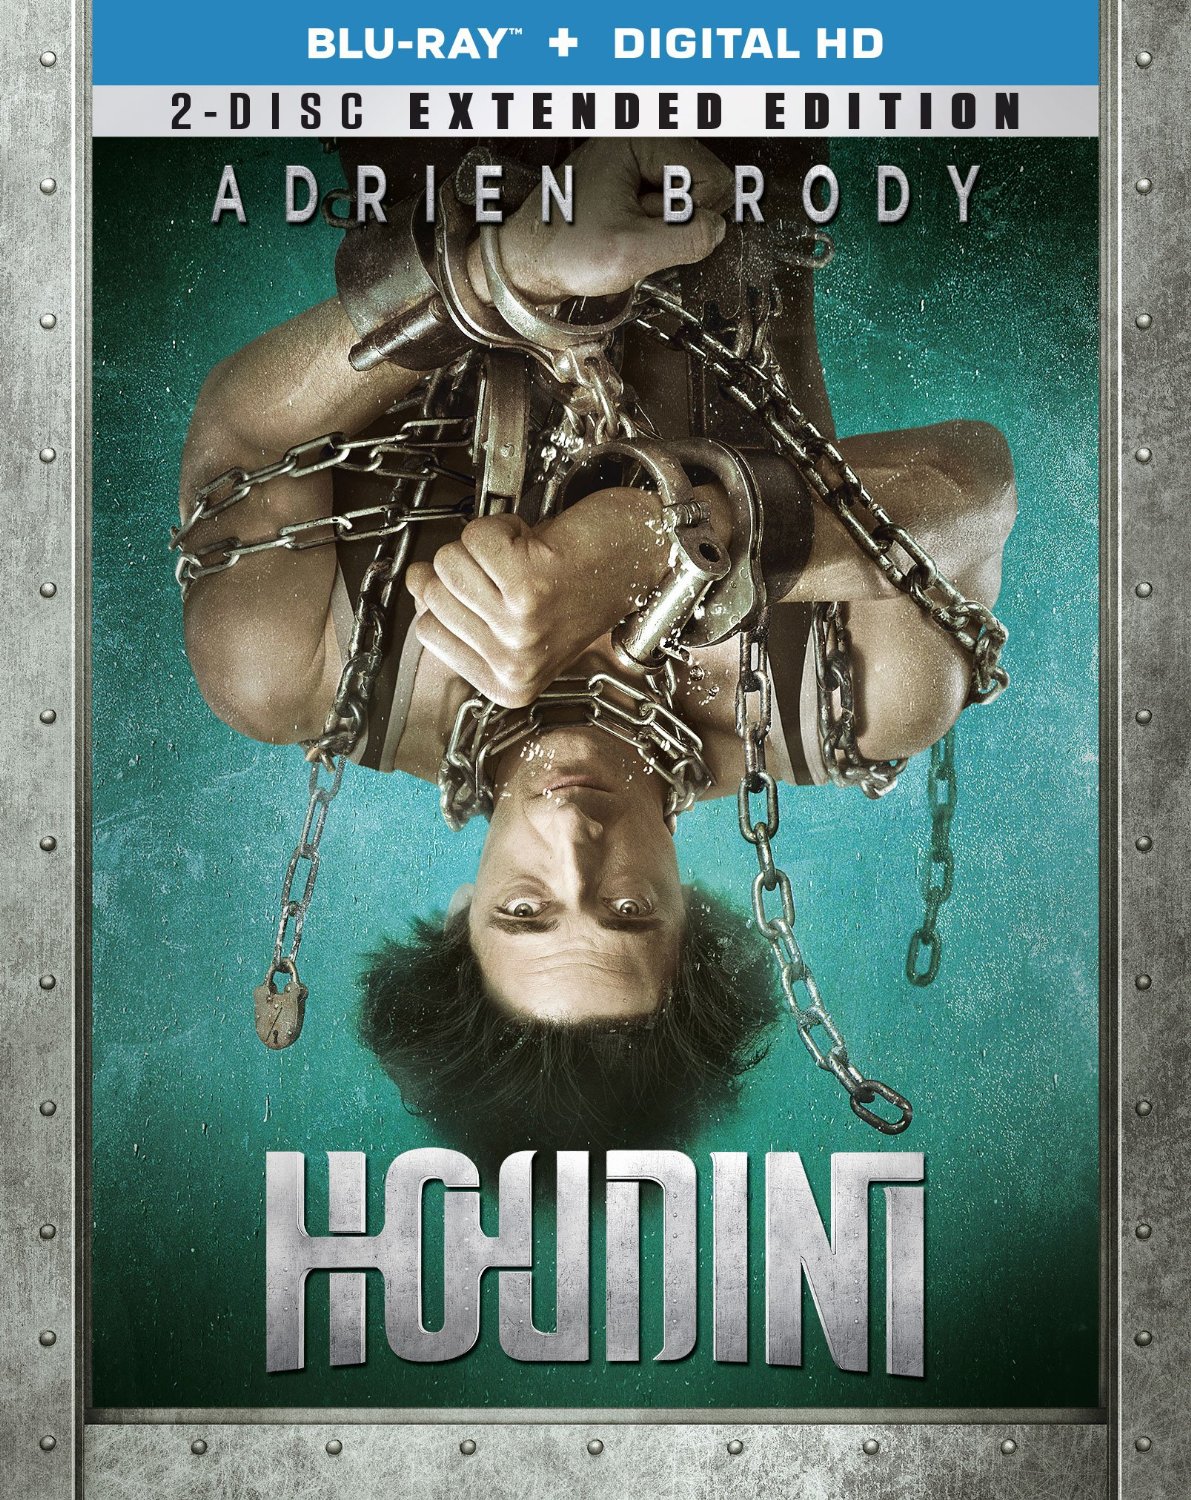 Houdini – History Channel biography of Harry Houdini, starring Adrien Brody